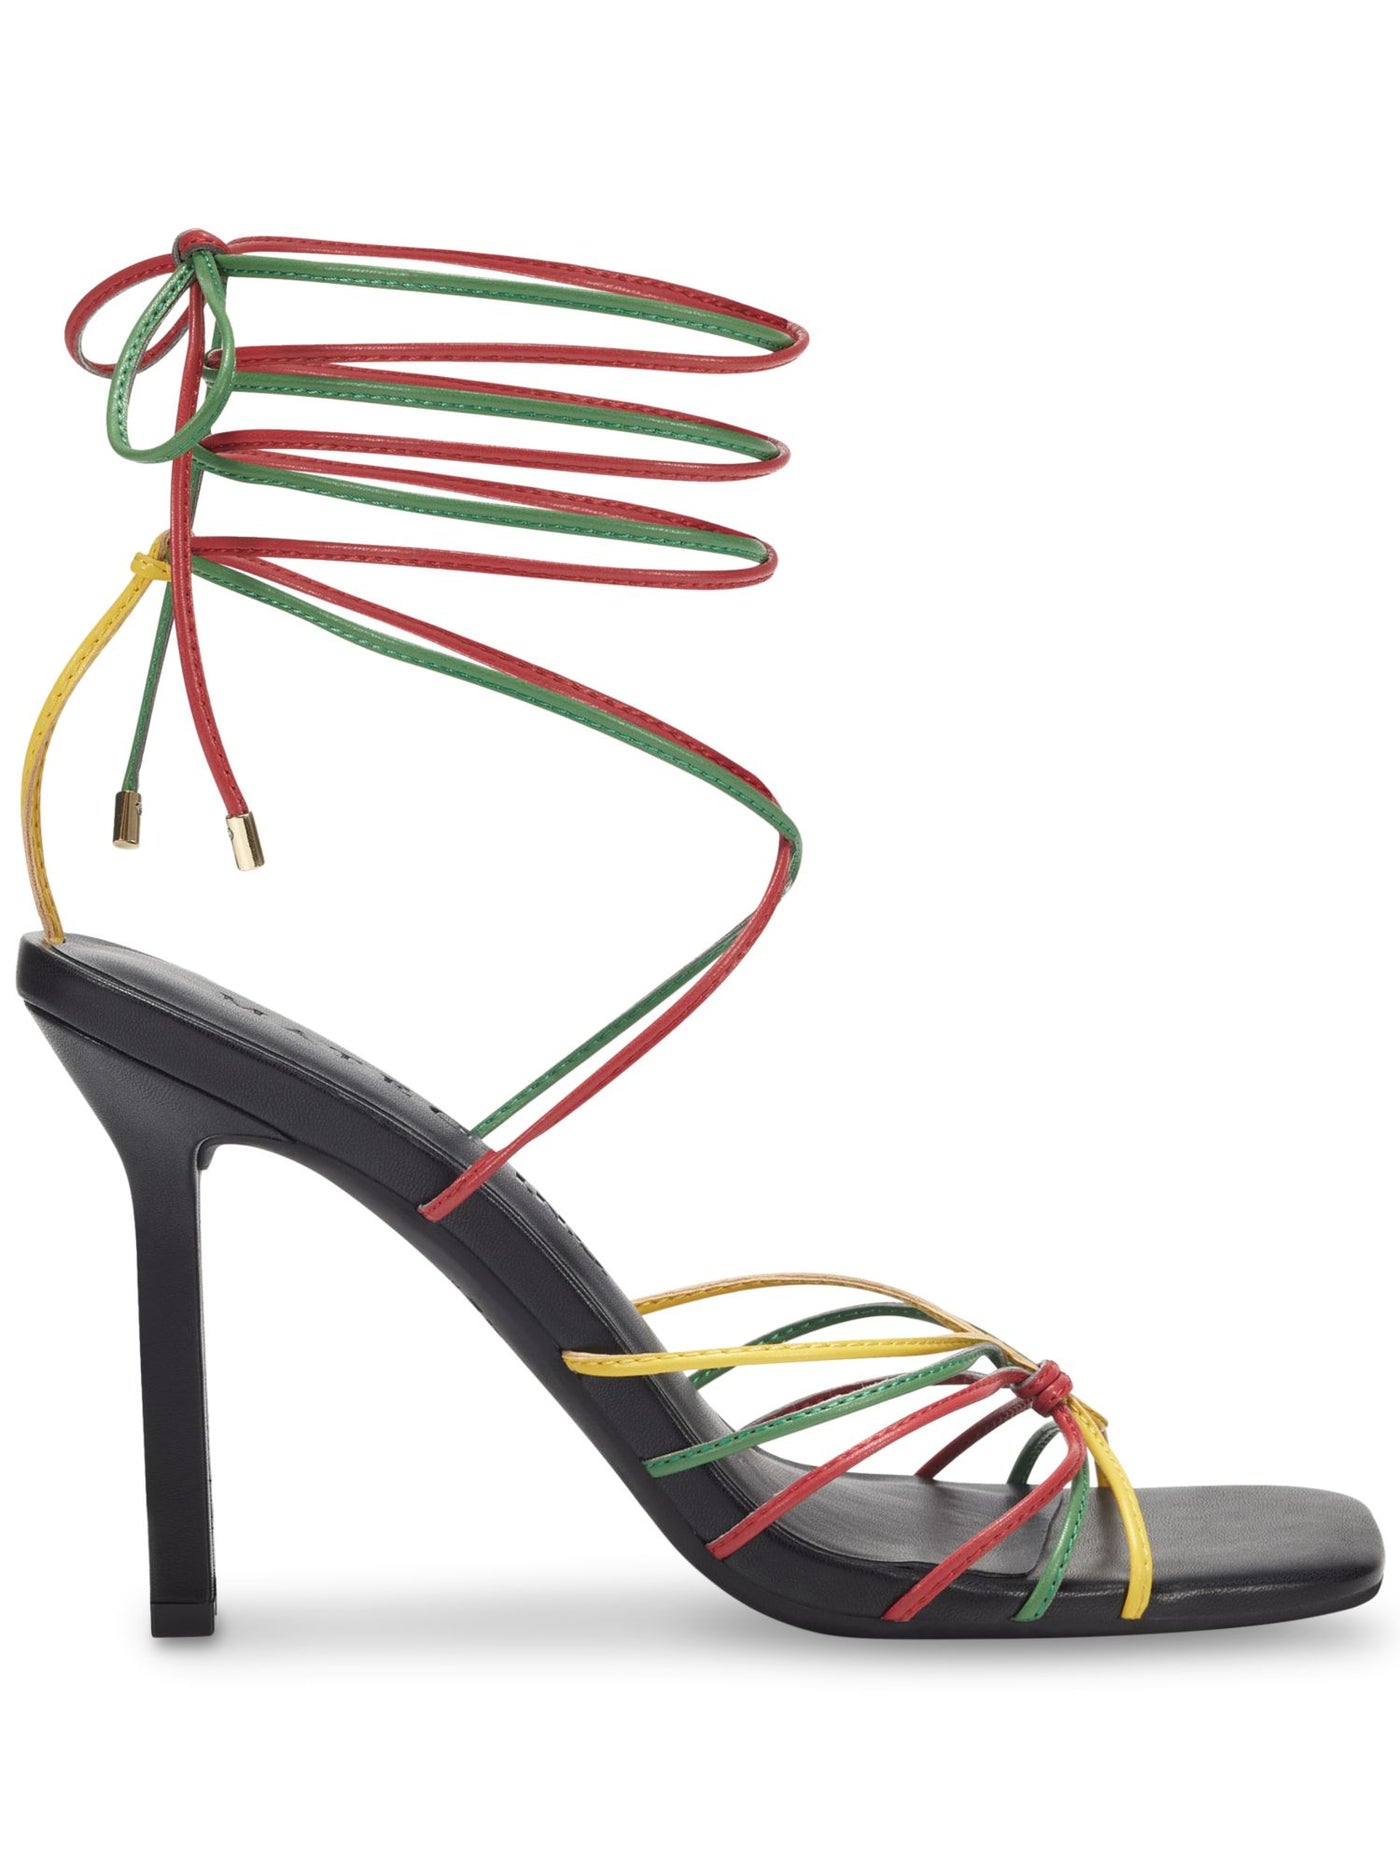 MATEO BY INC Womens Black Comfort Strappy Reggae Square Toe Stiletto Lace-Up Heeled Sandal 6 M